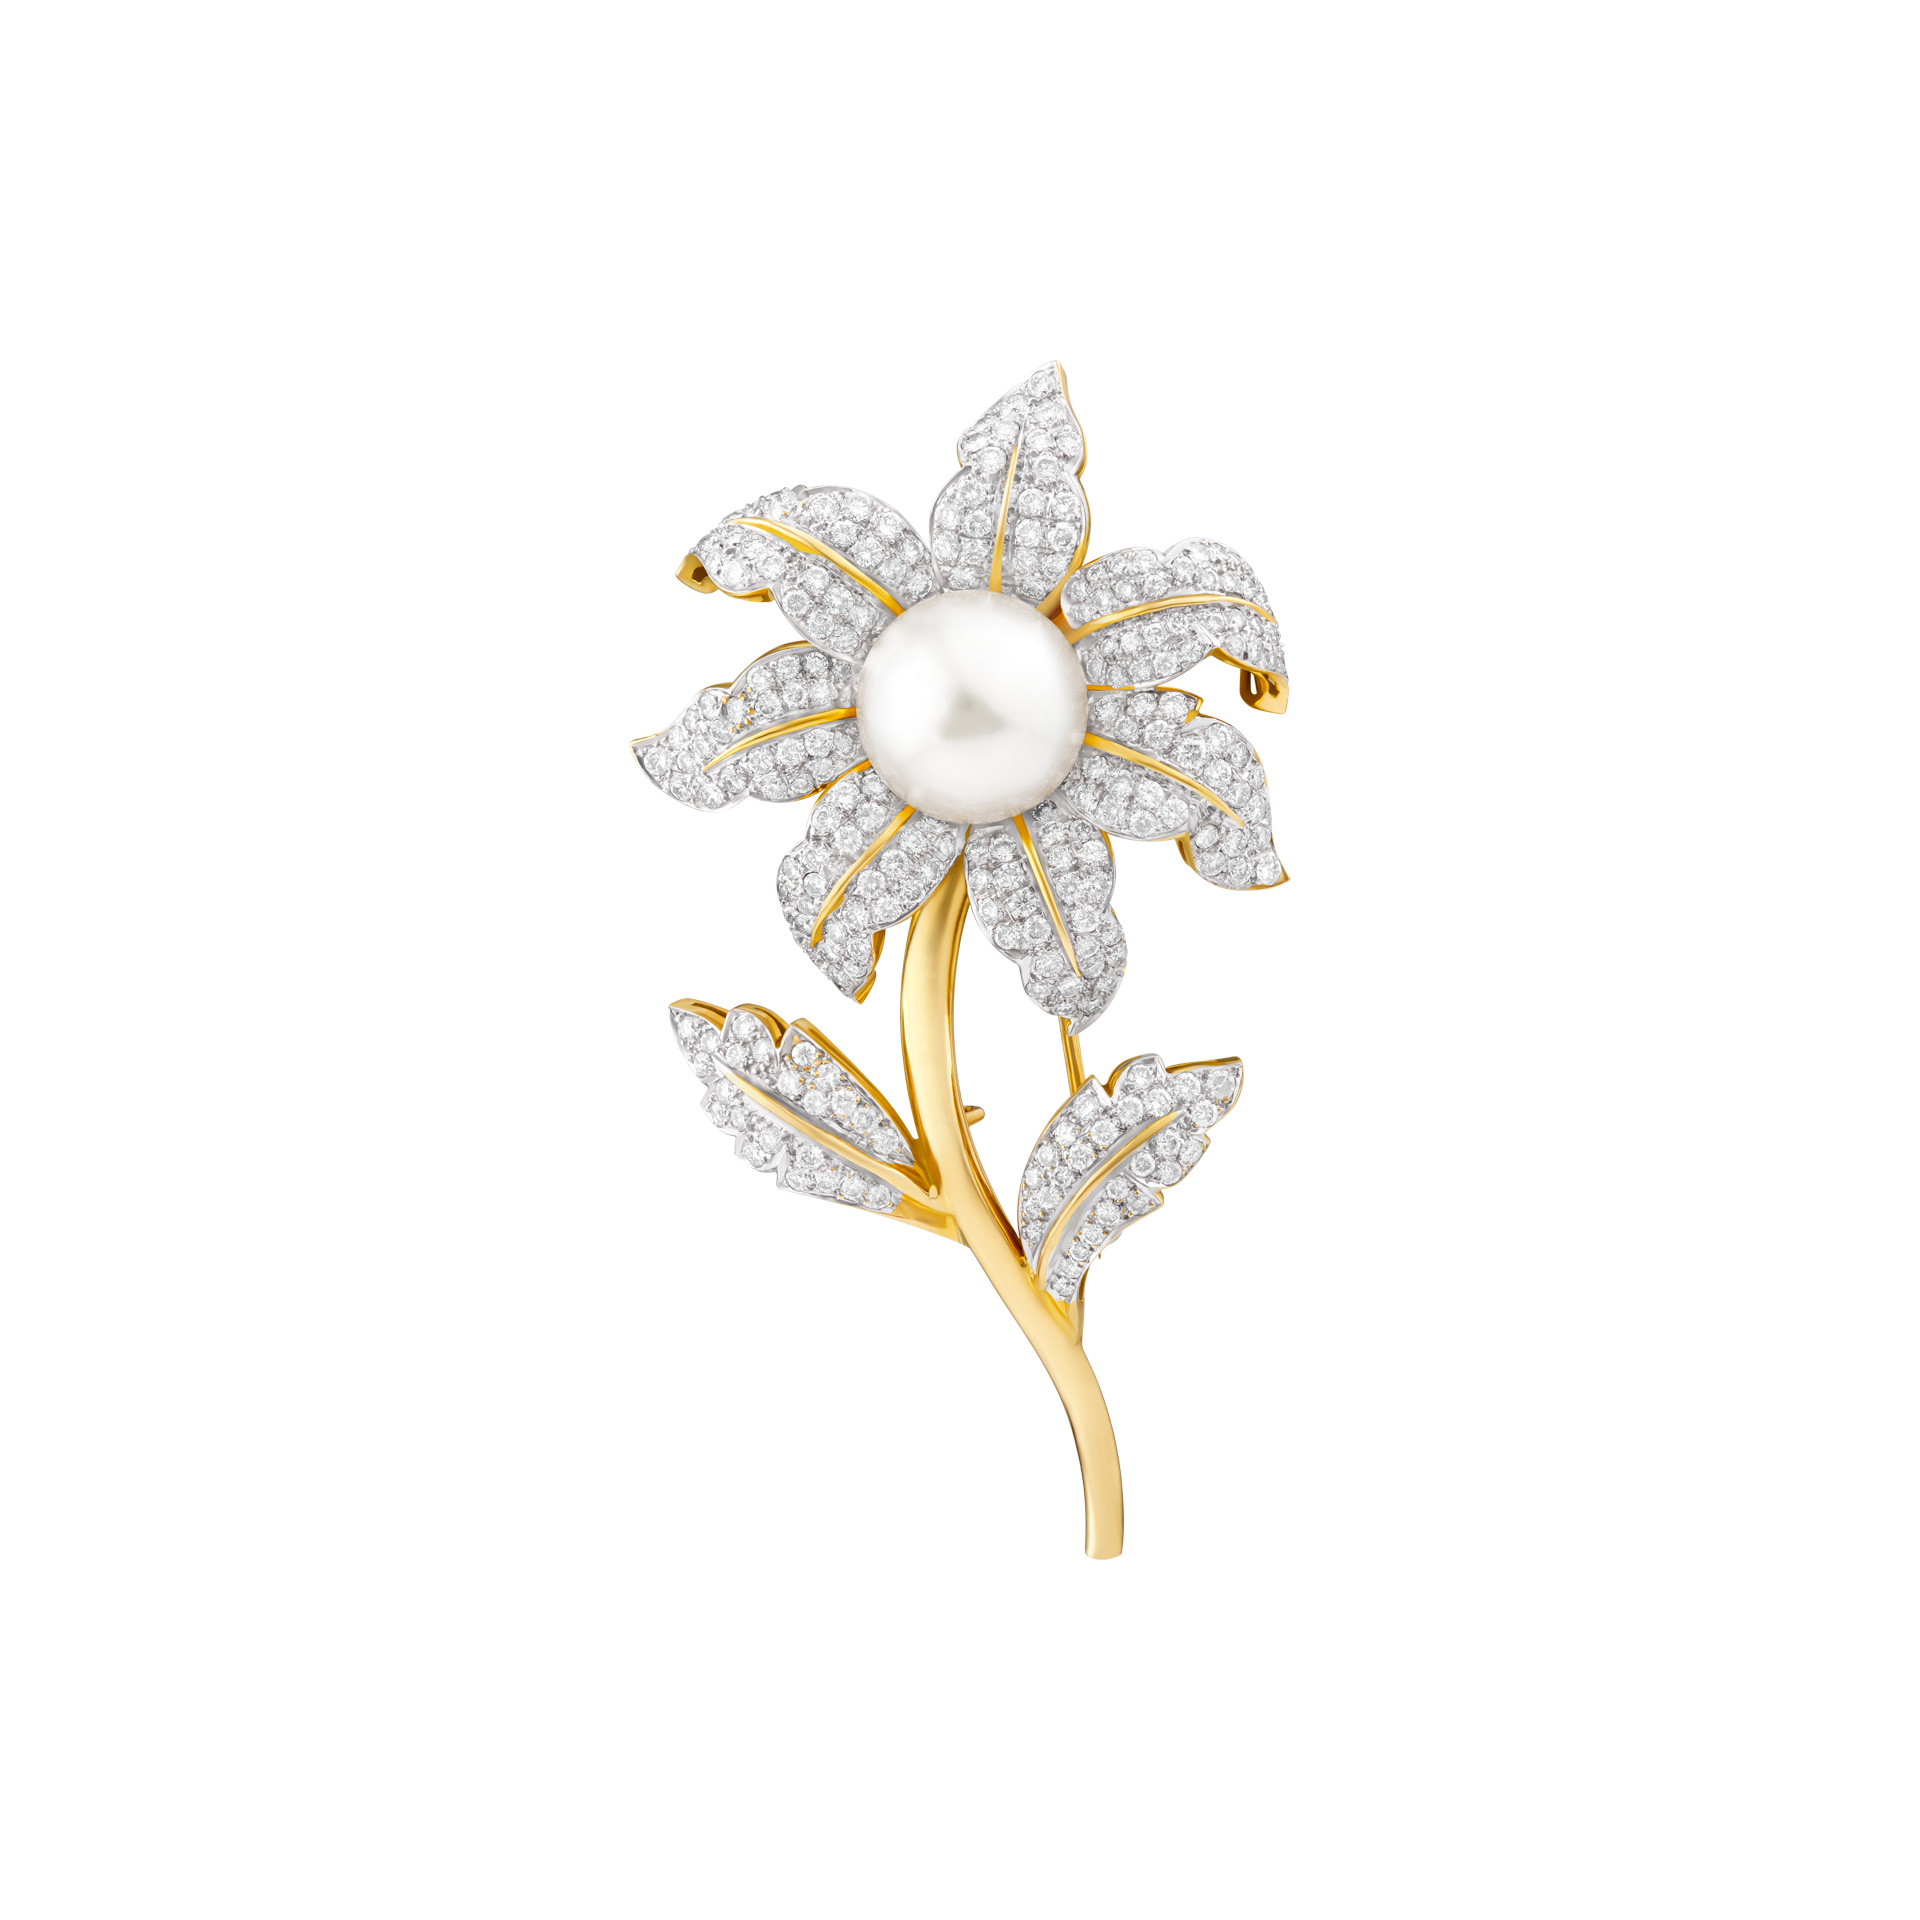 Pearl Flower broach in 18k with diamonds image 1